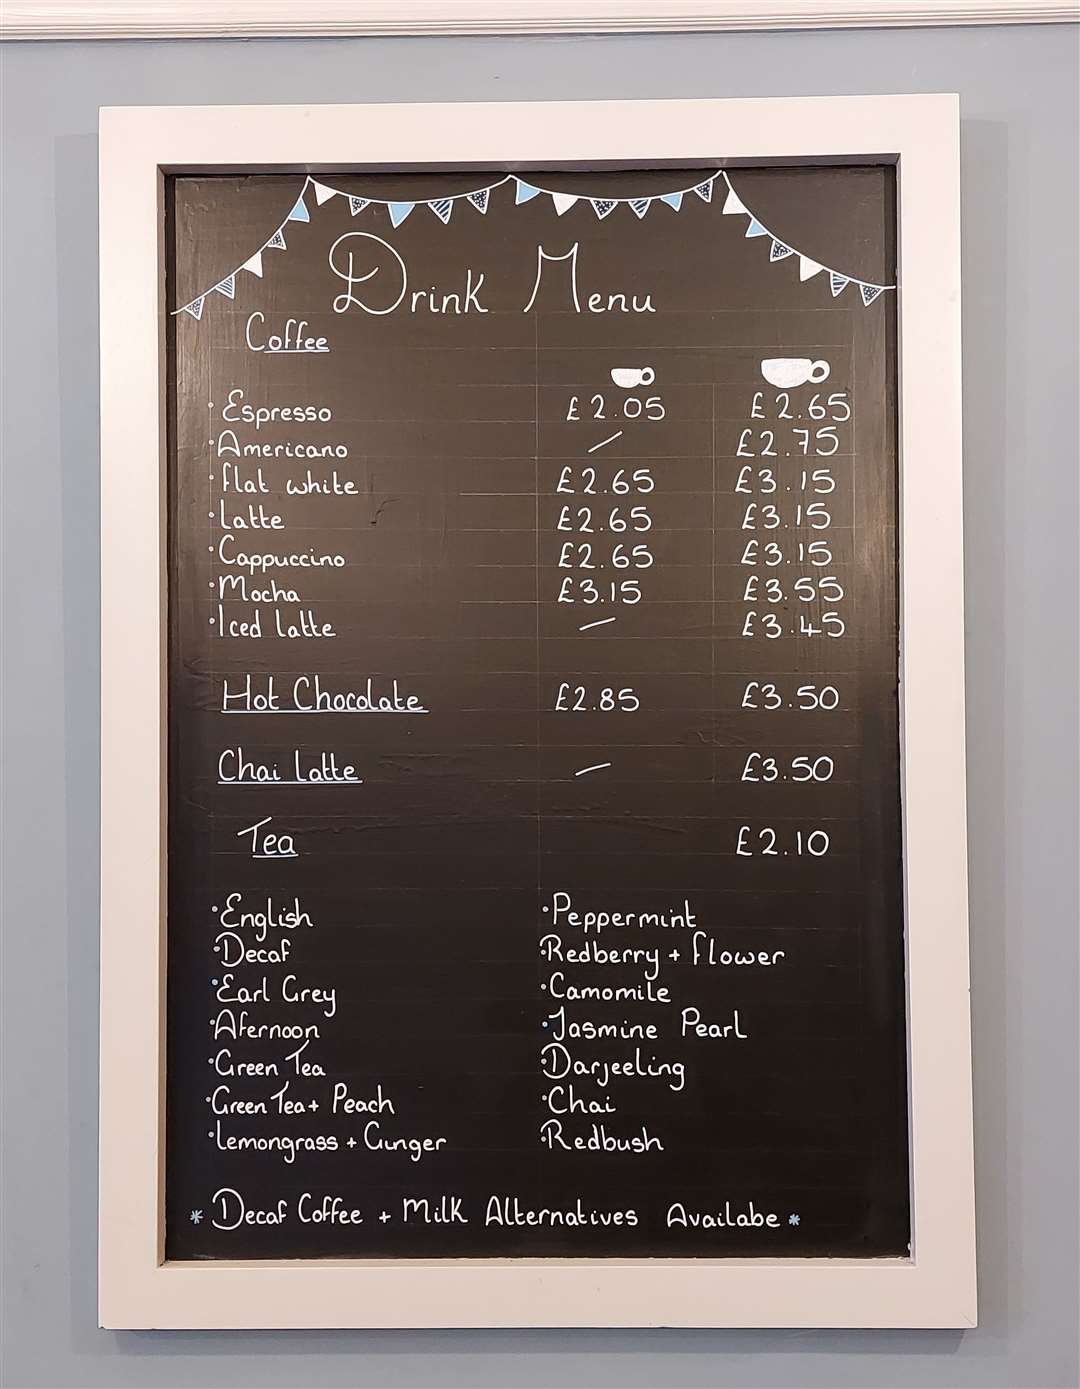 New menu boards have been put up ready for Monday